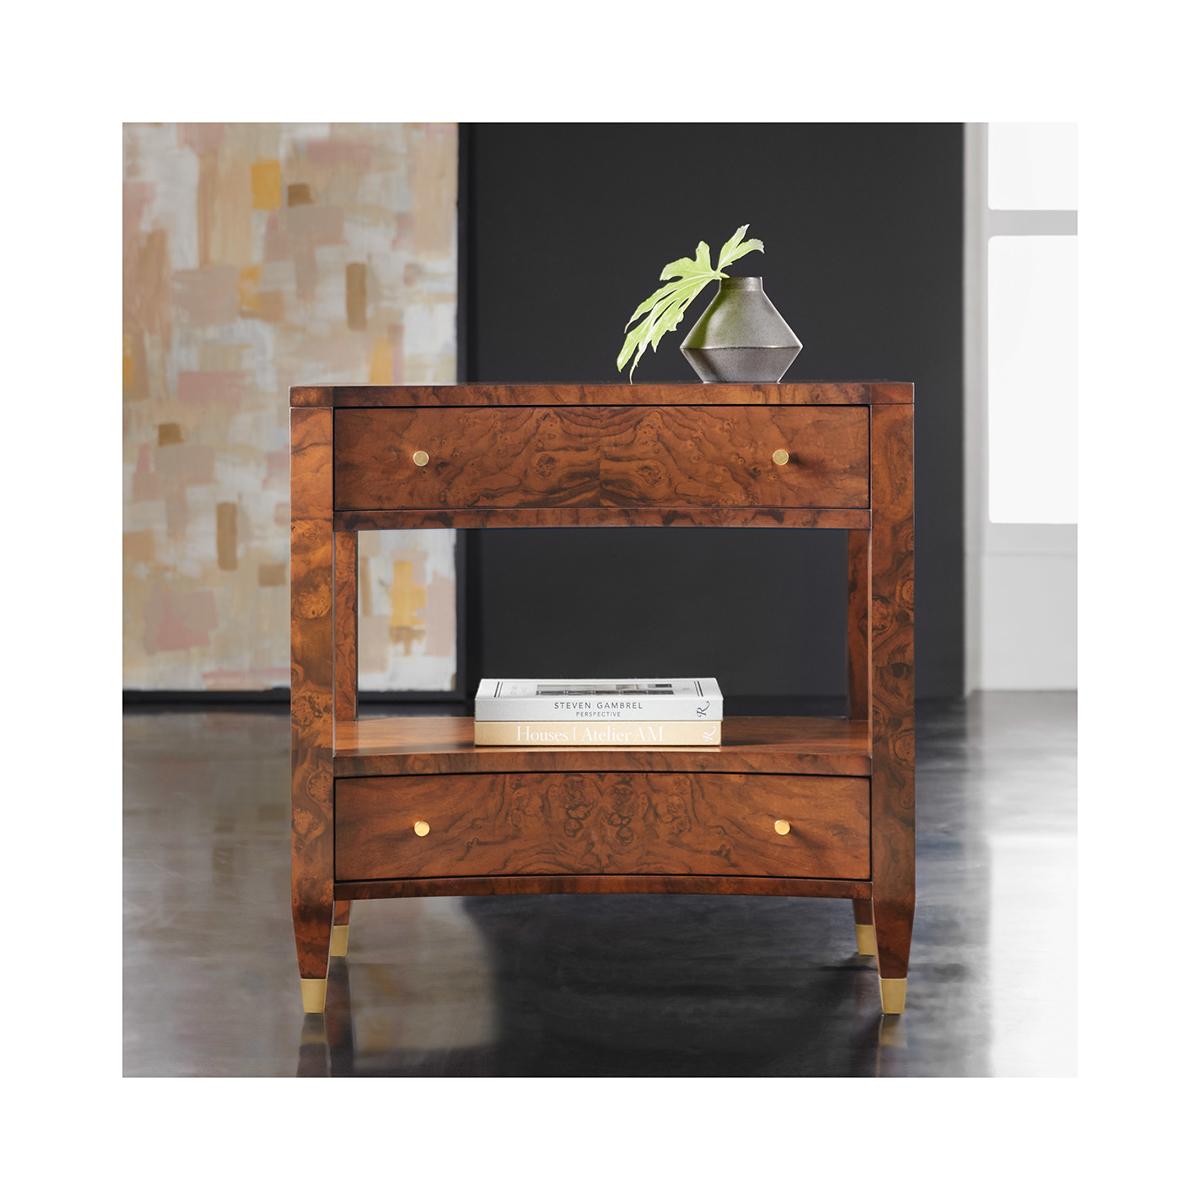 Modern Burl Nightstand, made with exotic burl walnut veneers, with a concave form front with two drawers and an open shelf space. Each drawer with polished brass knobs and with square tapered legs on brass feet.

Dimensions: 30